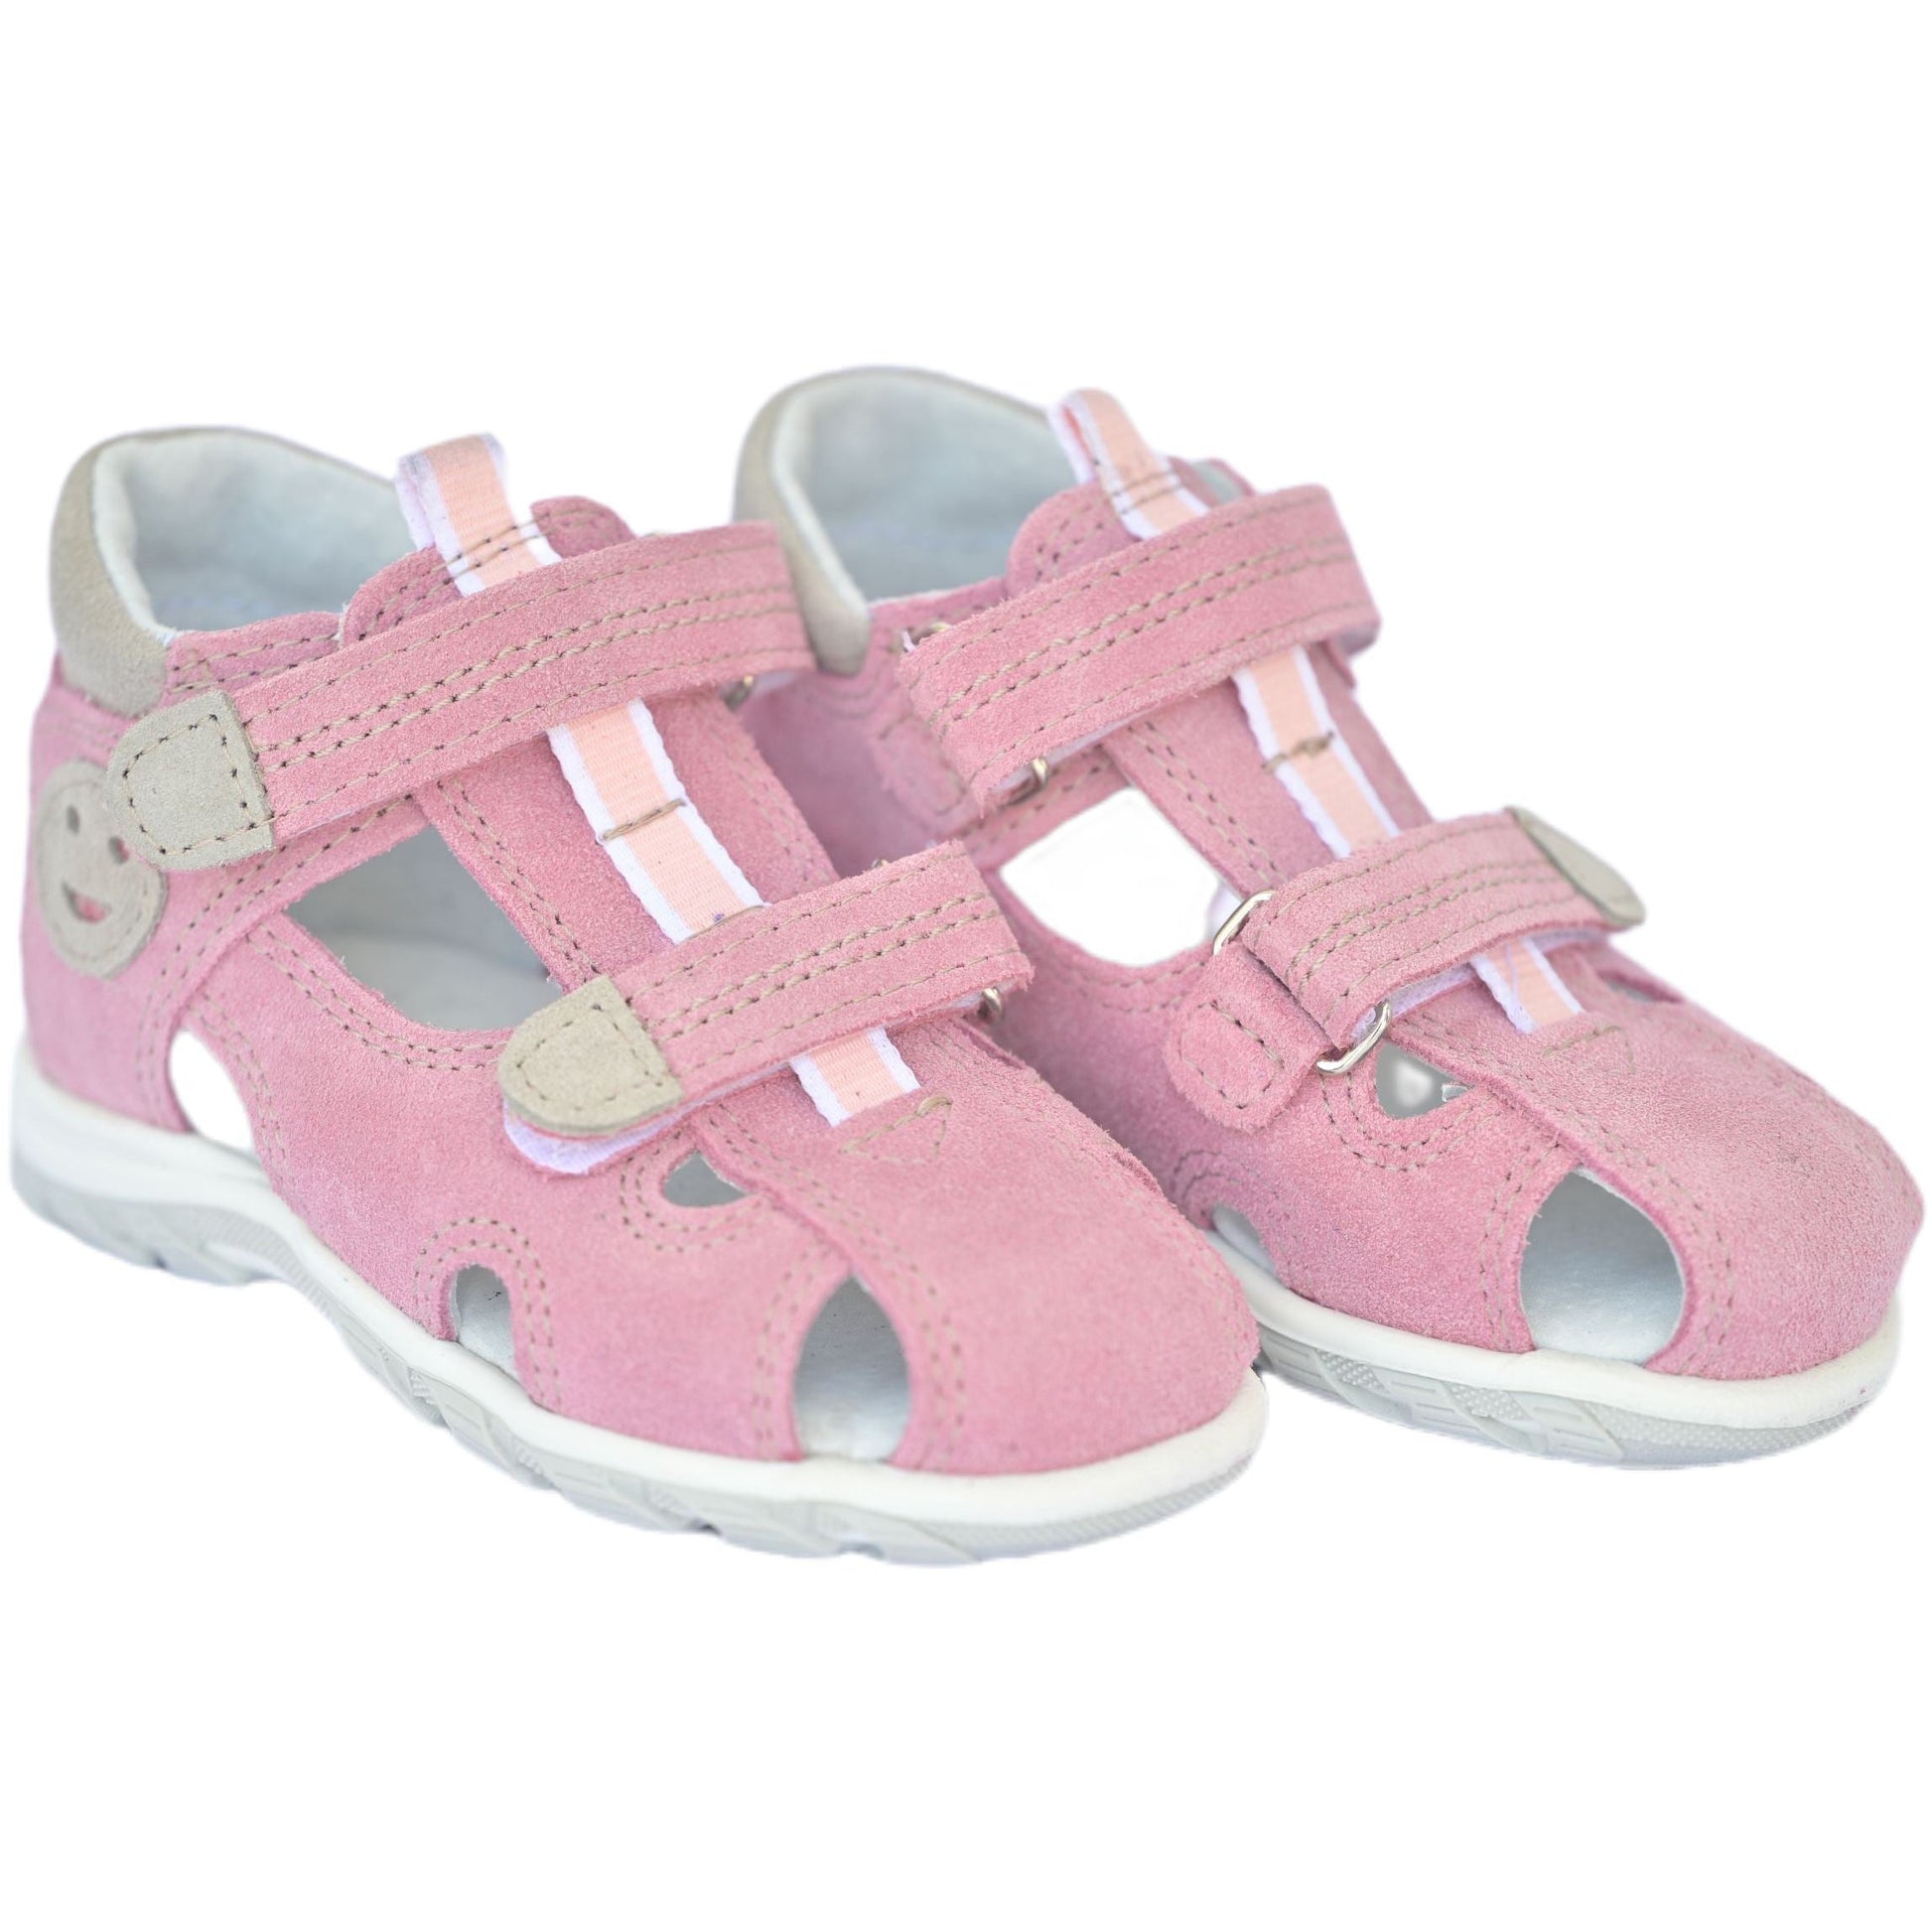 orthopedic toddler girl sandals: T102: color pink - feelgoodshoes.ae